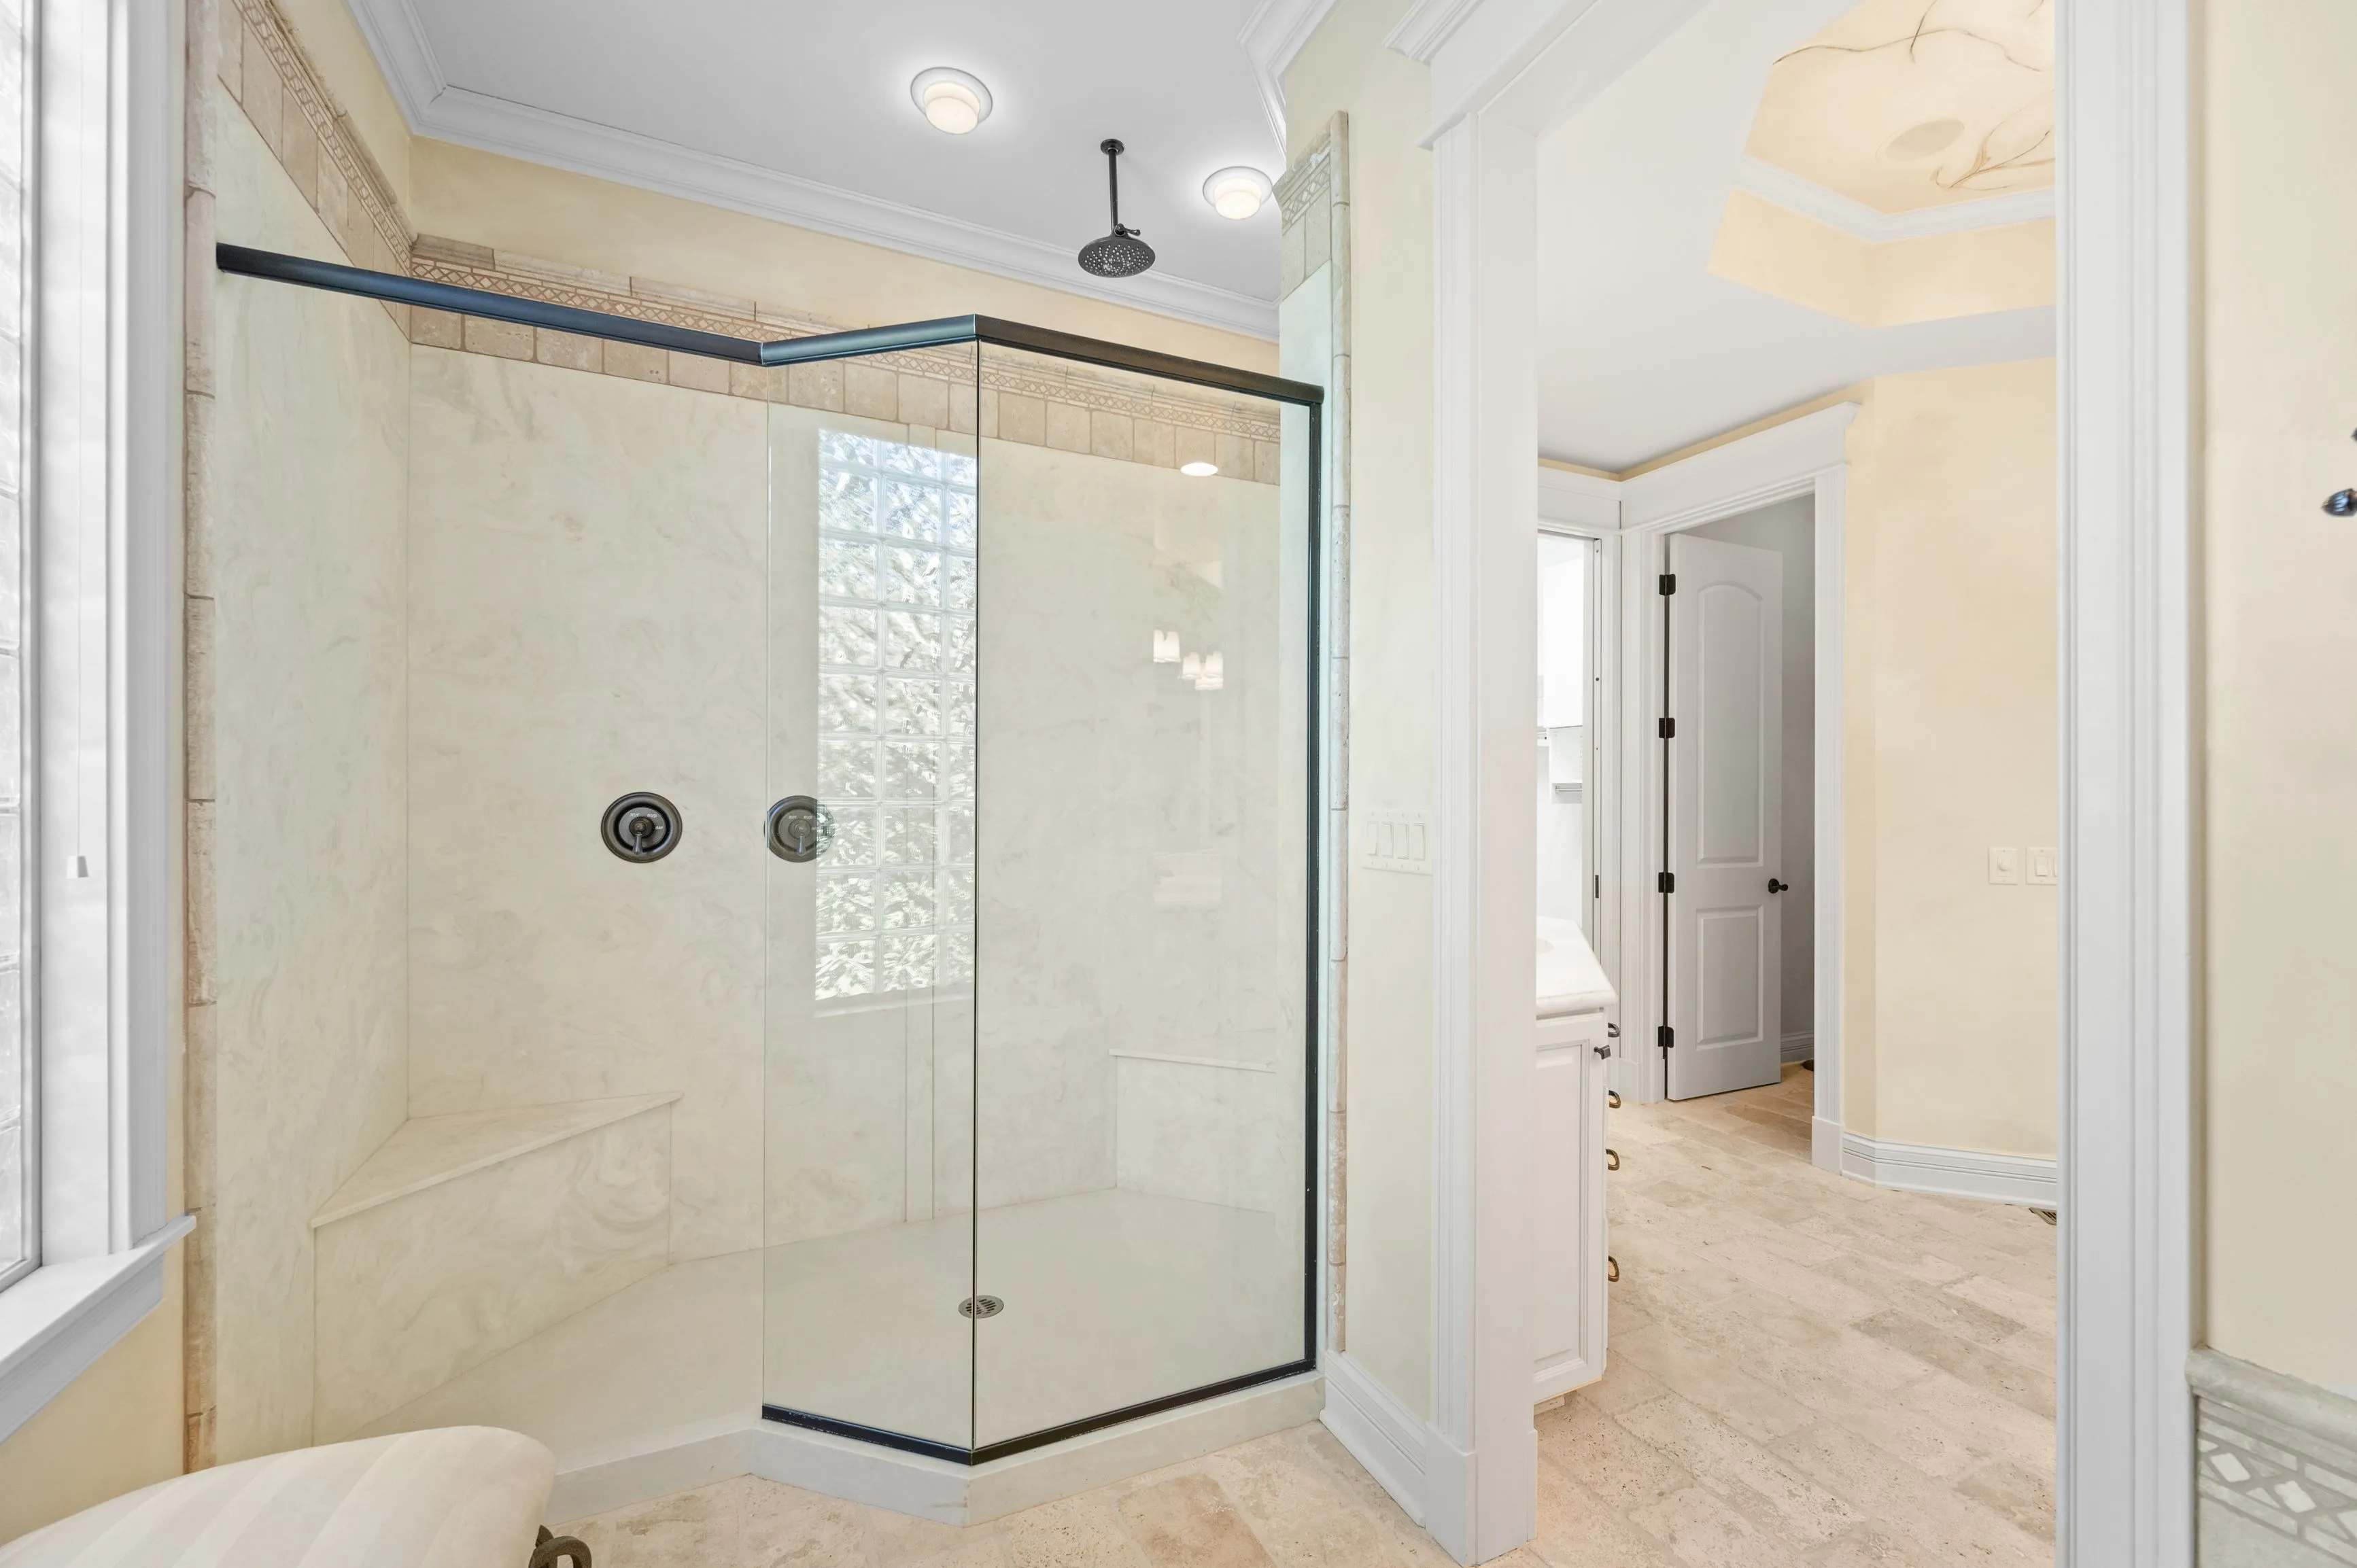 Elegant bathroom interior featuring a glass-enclosed shower with marble walls, seen through an open door with a view of a bedroom entrance in the background.